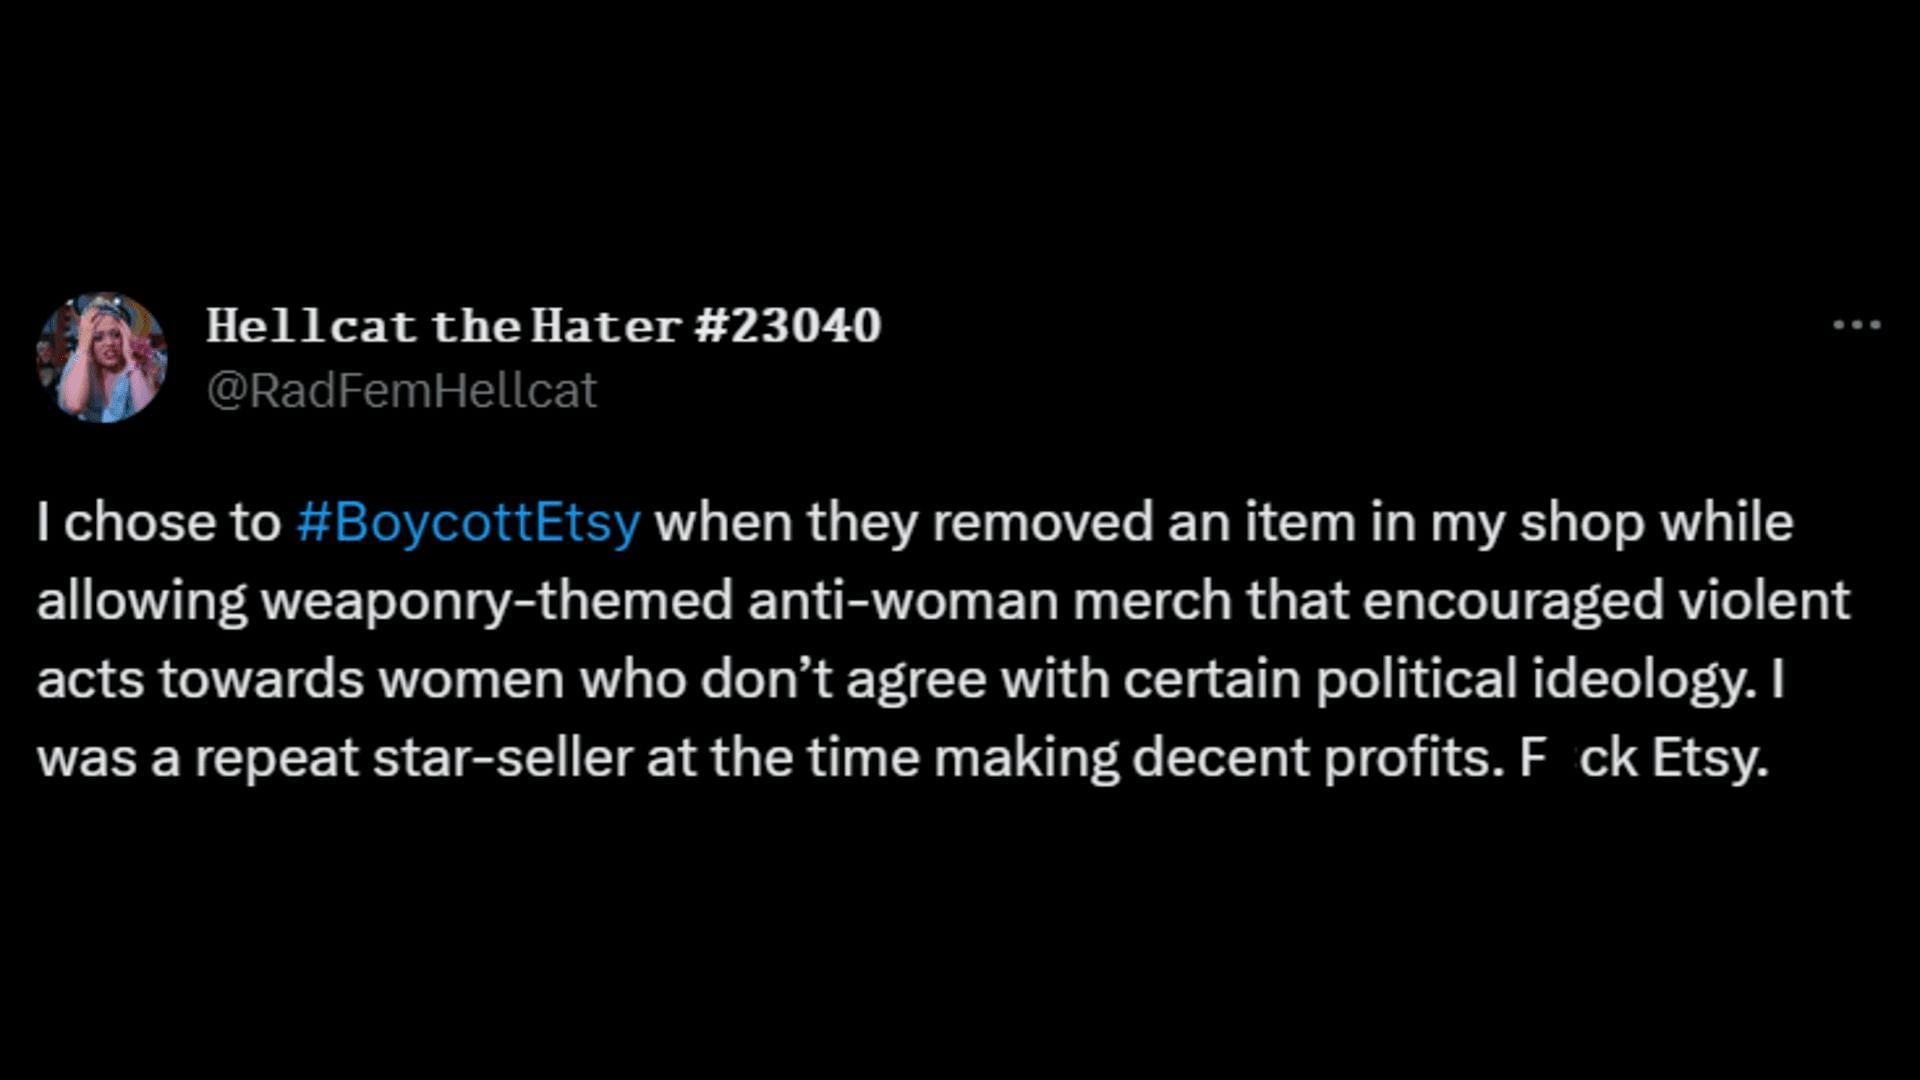 A netizen points out how the site sells anti-women merchandise. (Image via Twitter/Hellcat the Hater #23040)